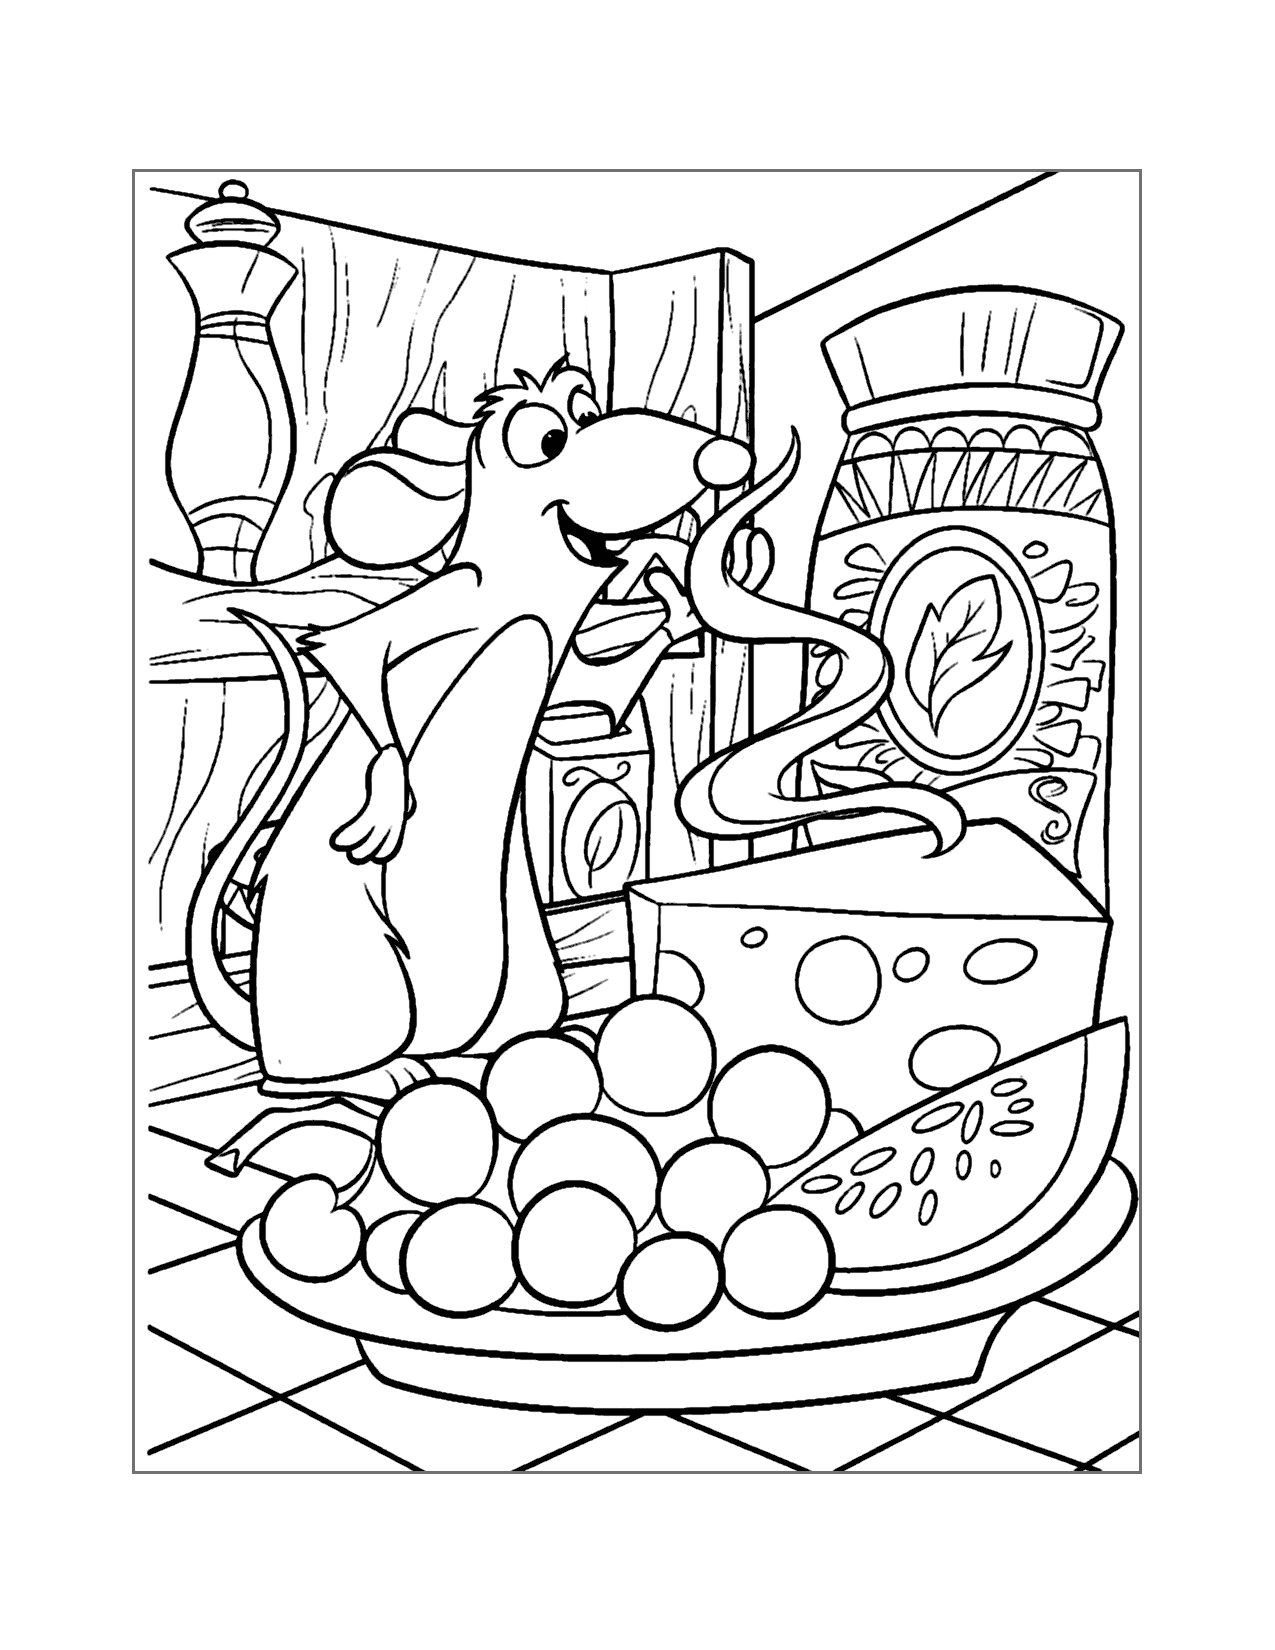 Remy Smells Delicious Cheese Coloring Page